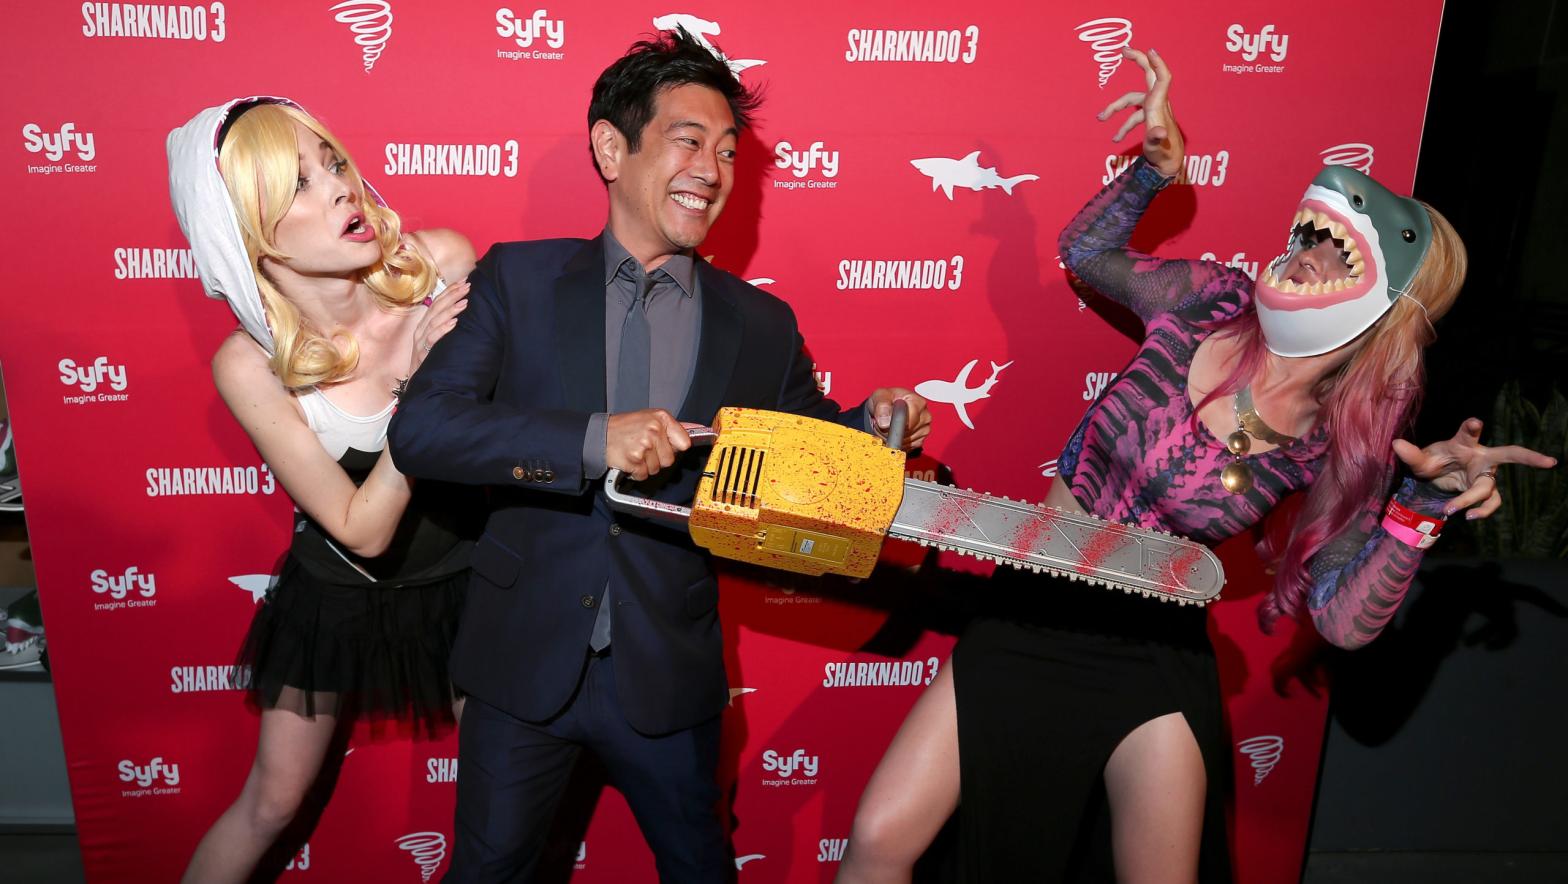 Grant Imahara at Comic-Con International 2015 on July 10, 2015 in San Diego, California.  (Photo: Mark Davis, Getty Images)